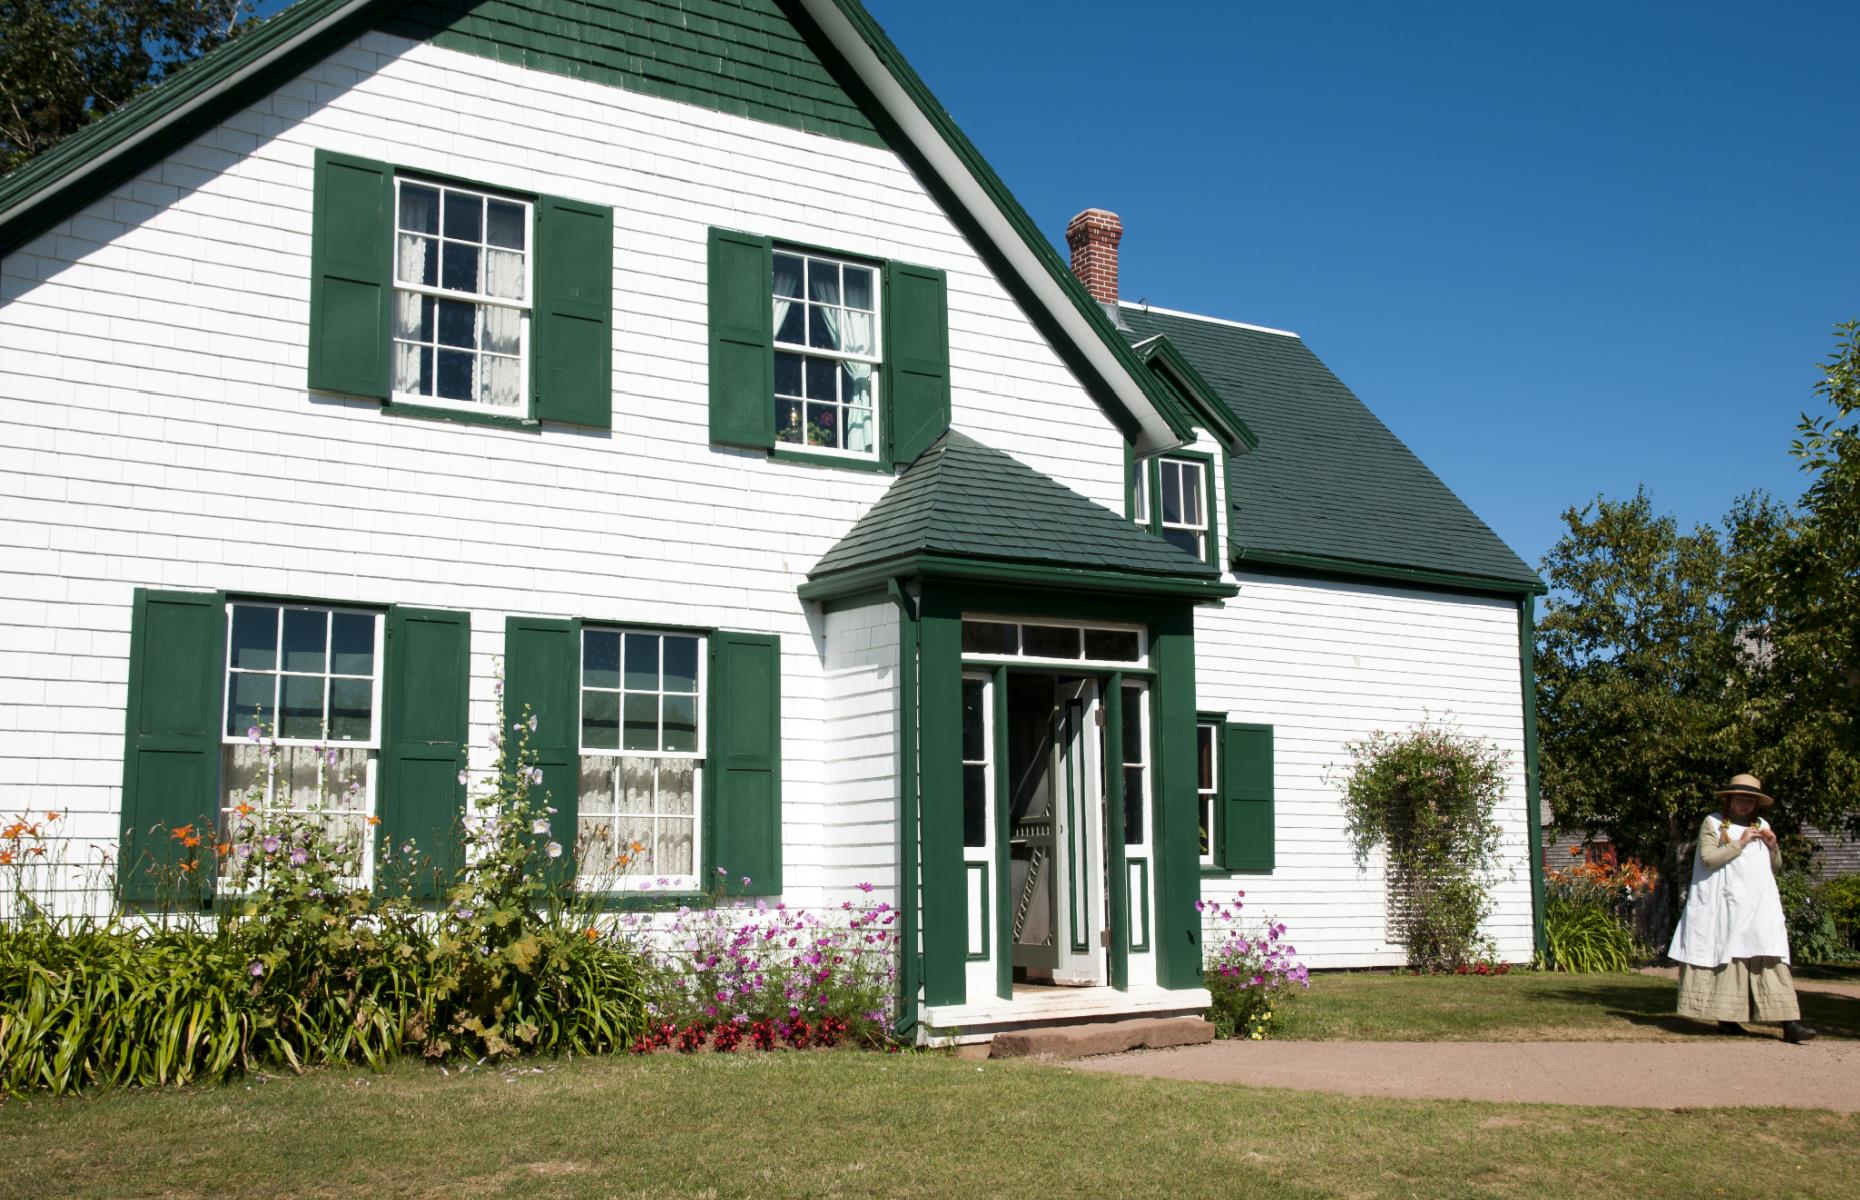 <p>The Green Gables Shore features PEI’s most famed sites, particularly those connected to L.M. Montgomery’s beloved Anne of Green Gables novels. The route goes through the Cavendish area, which is home to the Green Gables house as well as some key museums. The Red Sands Shore is a bit quieter and more relaxed, full of small coastal villages and cozy coves. </p>  <p><strong><a href="https://www.loveexploring.com/guides/79391/prince-edward-island-top-things-to-do-where-to-stay-what-to-eat">Explore PEI with our full guide to the region</a></strong></p>